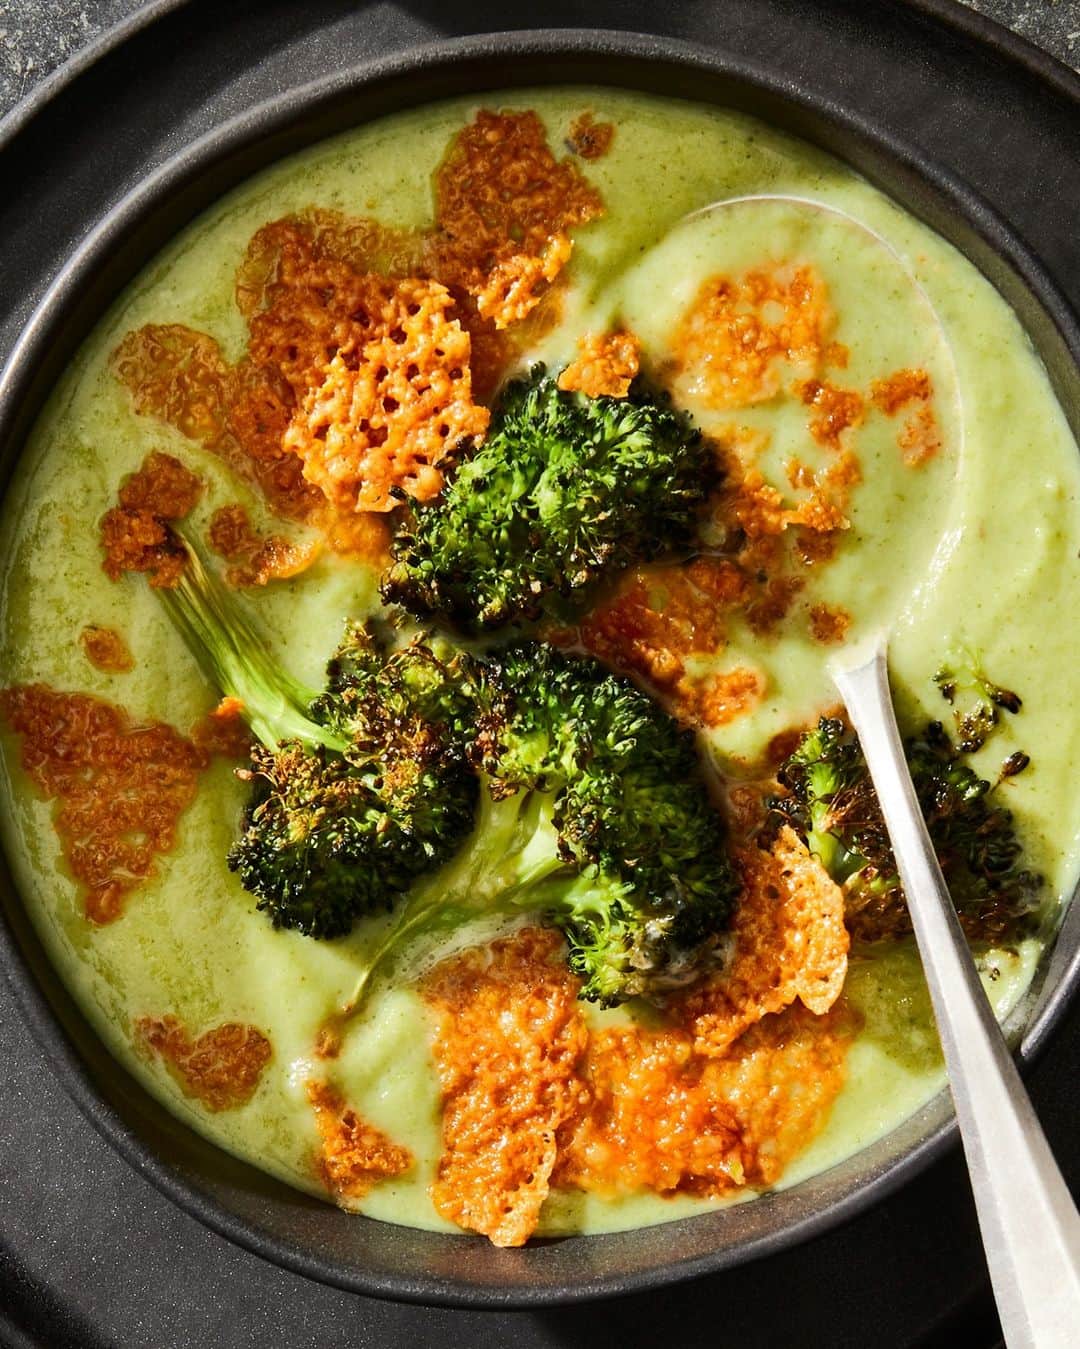 Food52のインスタグラム：「Are you ready to meet the broccoli-est broccoli cheese soup you've ever had?! It's @emmalaperruque's latest installment of her #biglittlerecipes column, and it comes together in just three ingredients. The first two are quite obvious (broccoli and cheese), but the third is a surprise. Let us know what you think it is in the comments below. Then head to the link in bio for the big reveal (aka the recipe).」